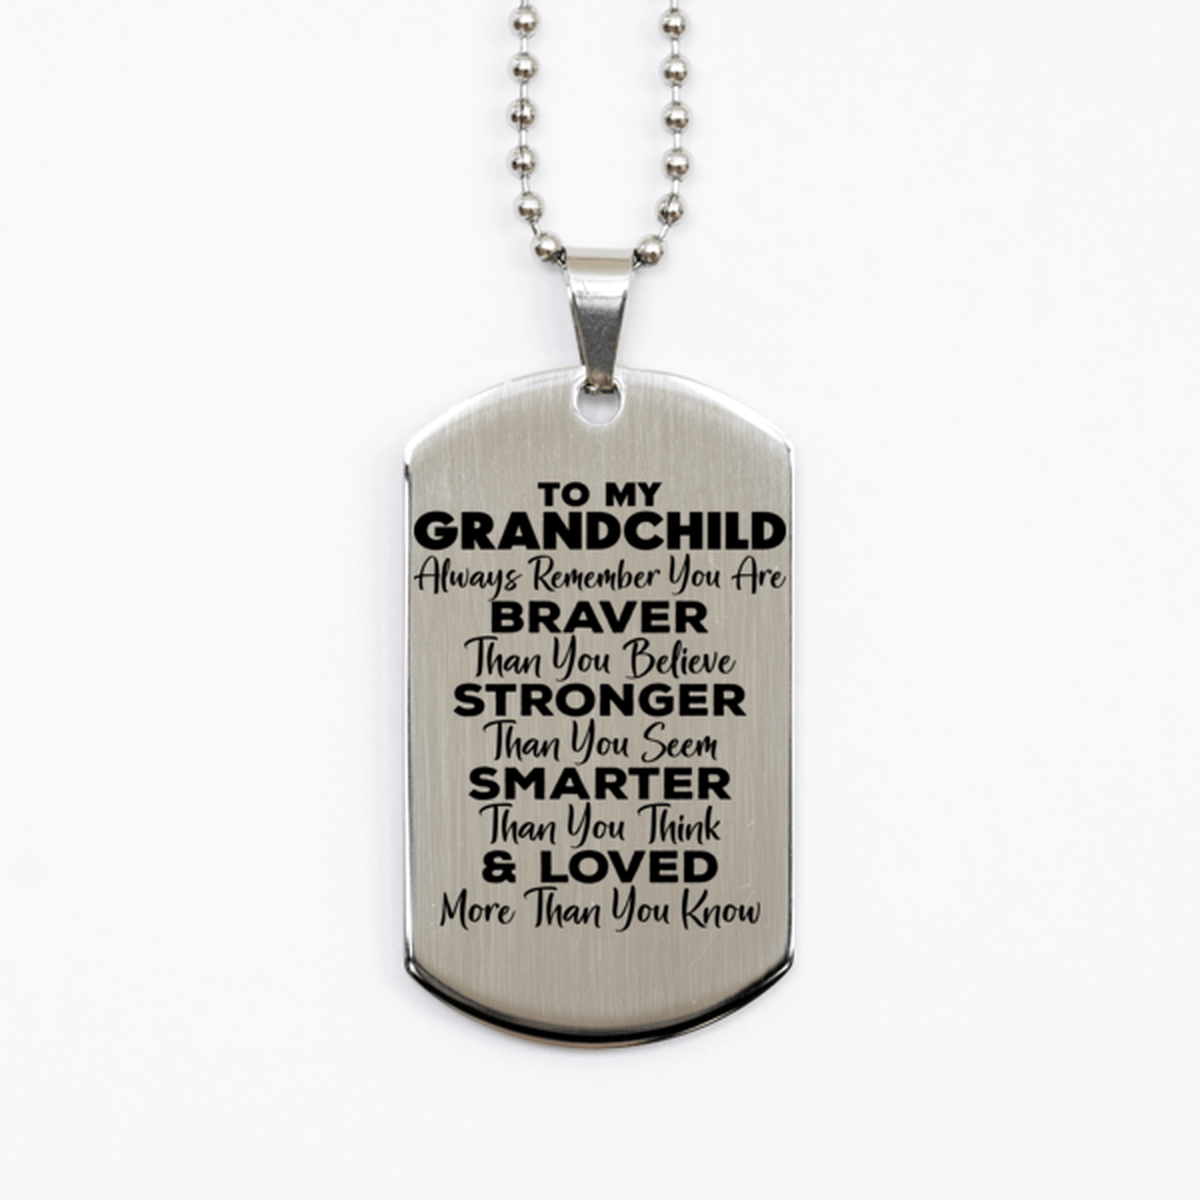 Motivational Grandchild Silver Dog Tag Necklace, Grandchild Always Remember You Are Braver Than You Believe, Best Birthday Gifts for Grandchild